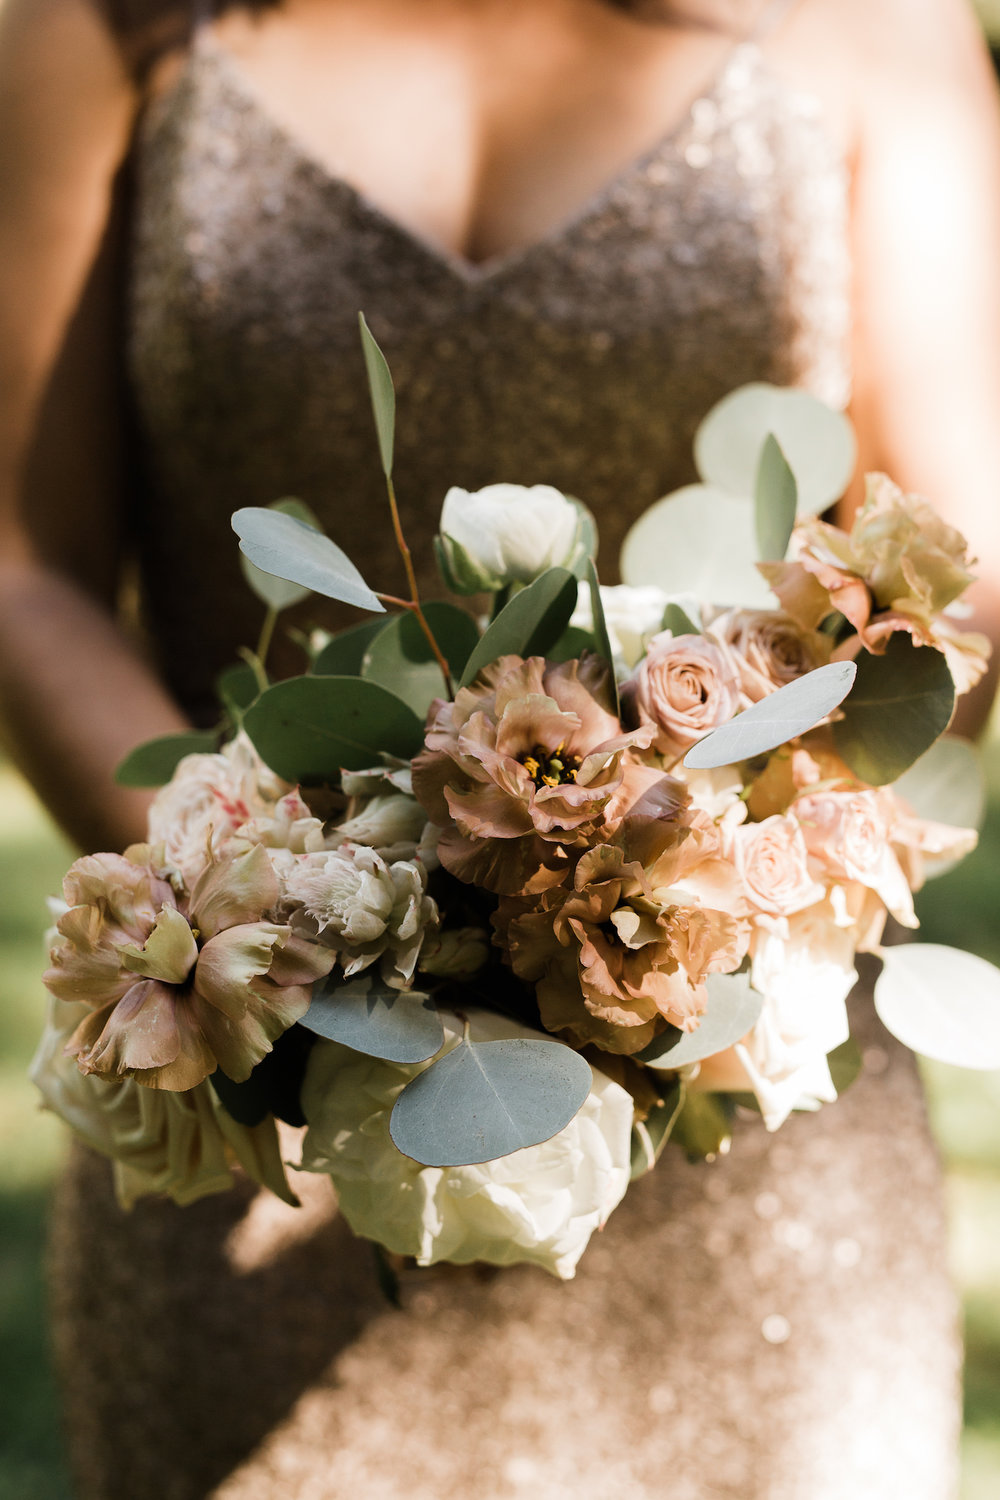 Wild Bloom Floral - Rachel Birkhofer Photography - Jessica and Phil - Real Wedding - Seattle 2.jpeg